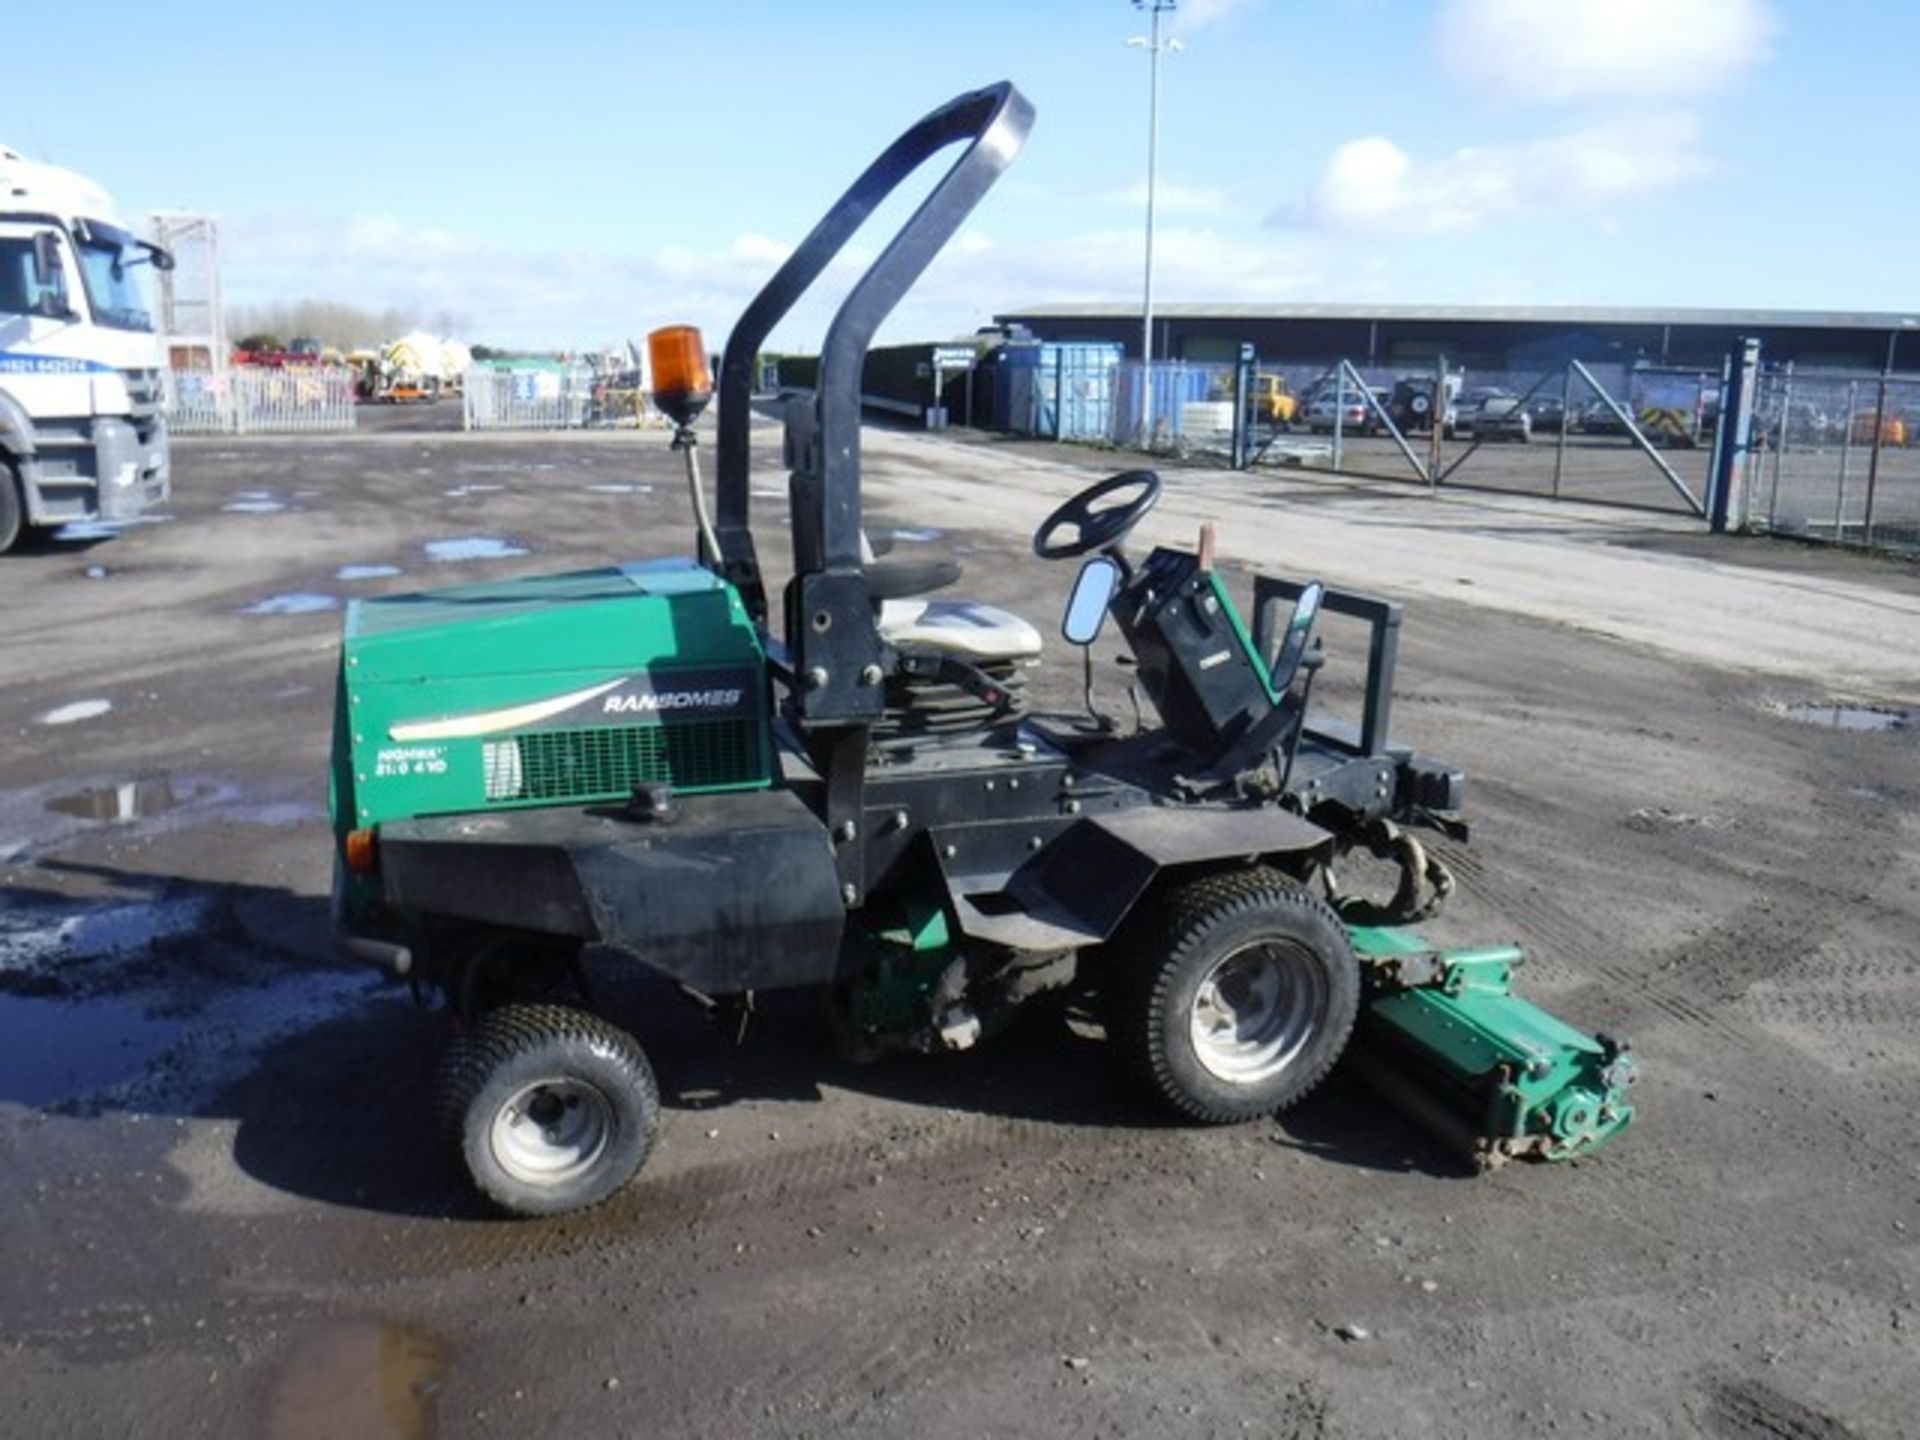 RANSOMES HIGHWAY 2120 mower. 3129 hrs (not verified) - Image 3 of 6